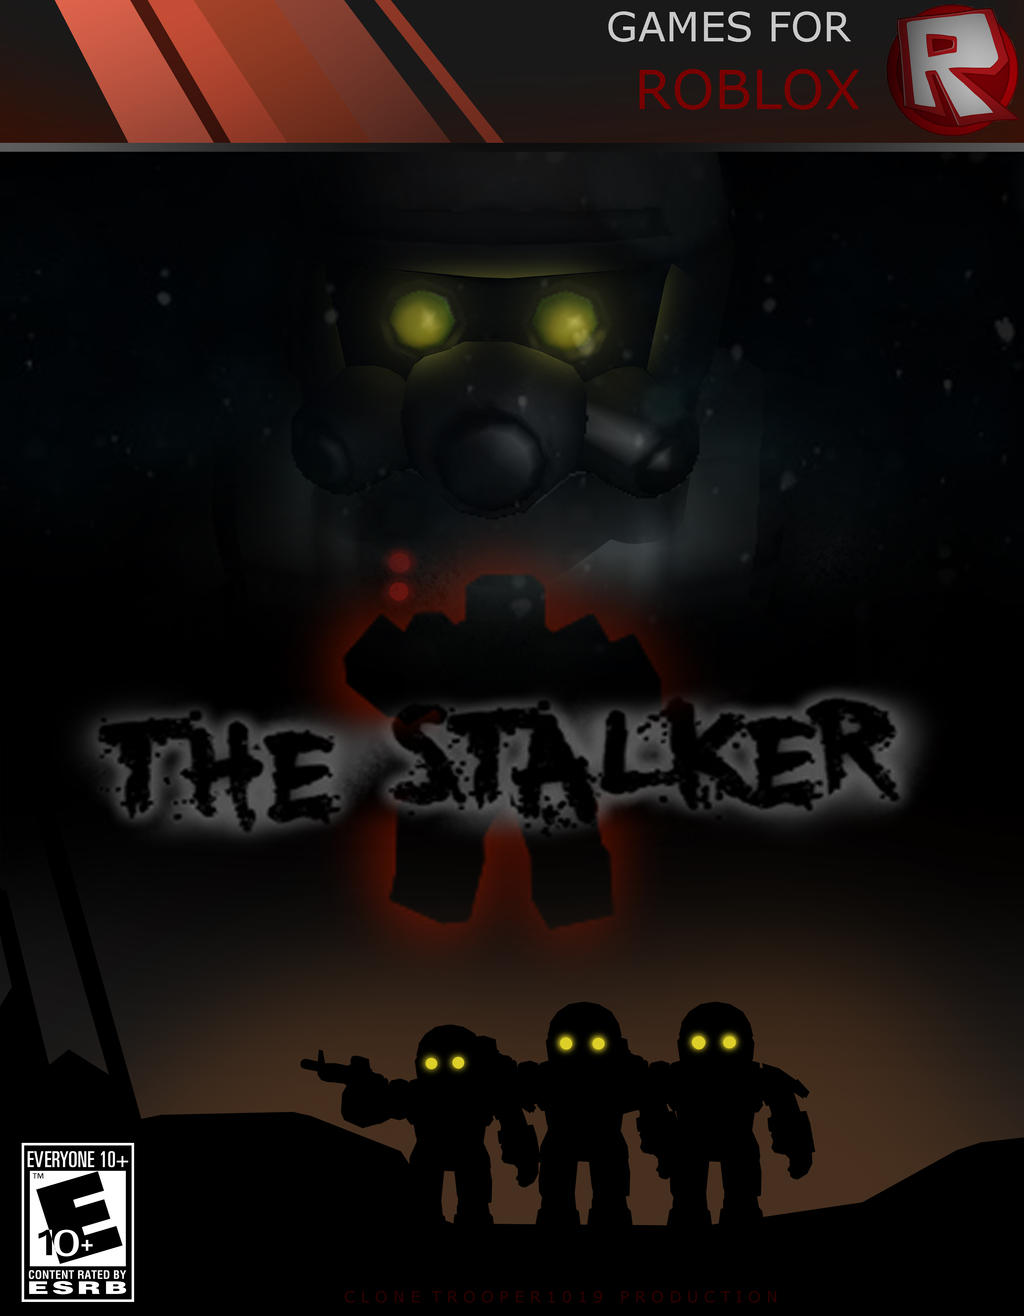 Roblox Game Cover The Stalker By Narniankitten On Deviantart - roblox clonetrooper1019 twitter